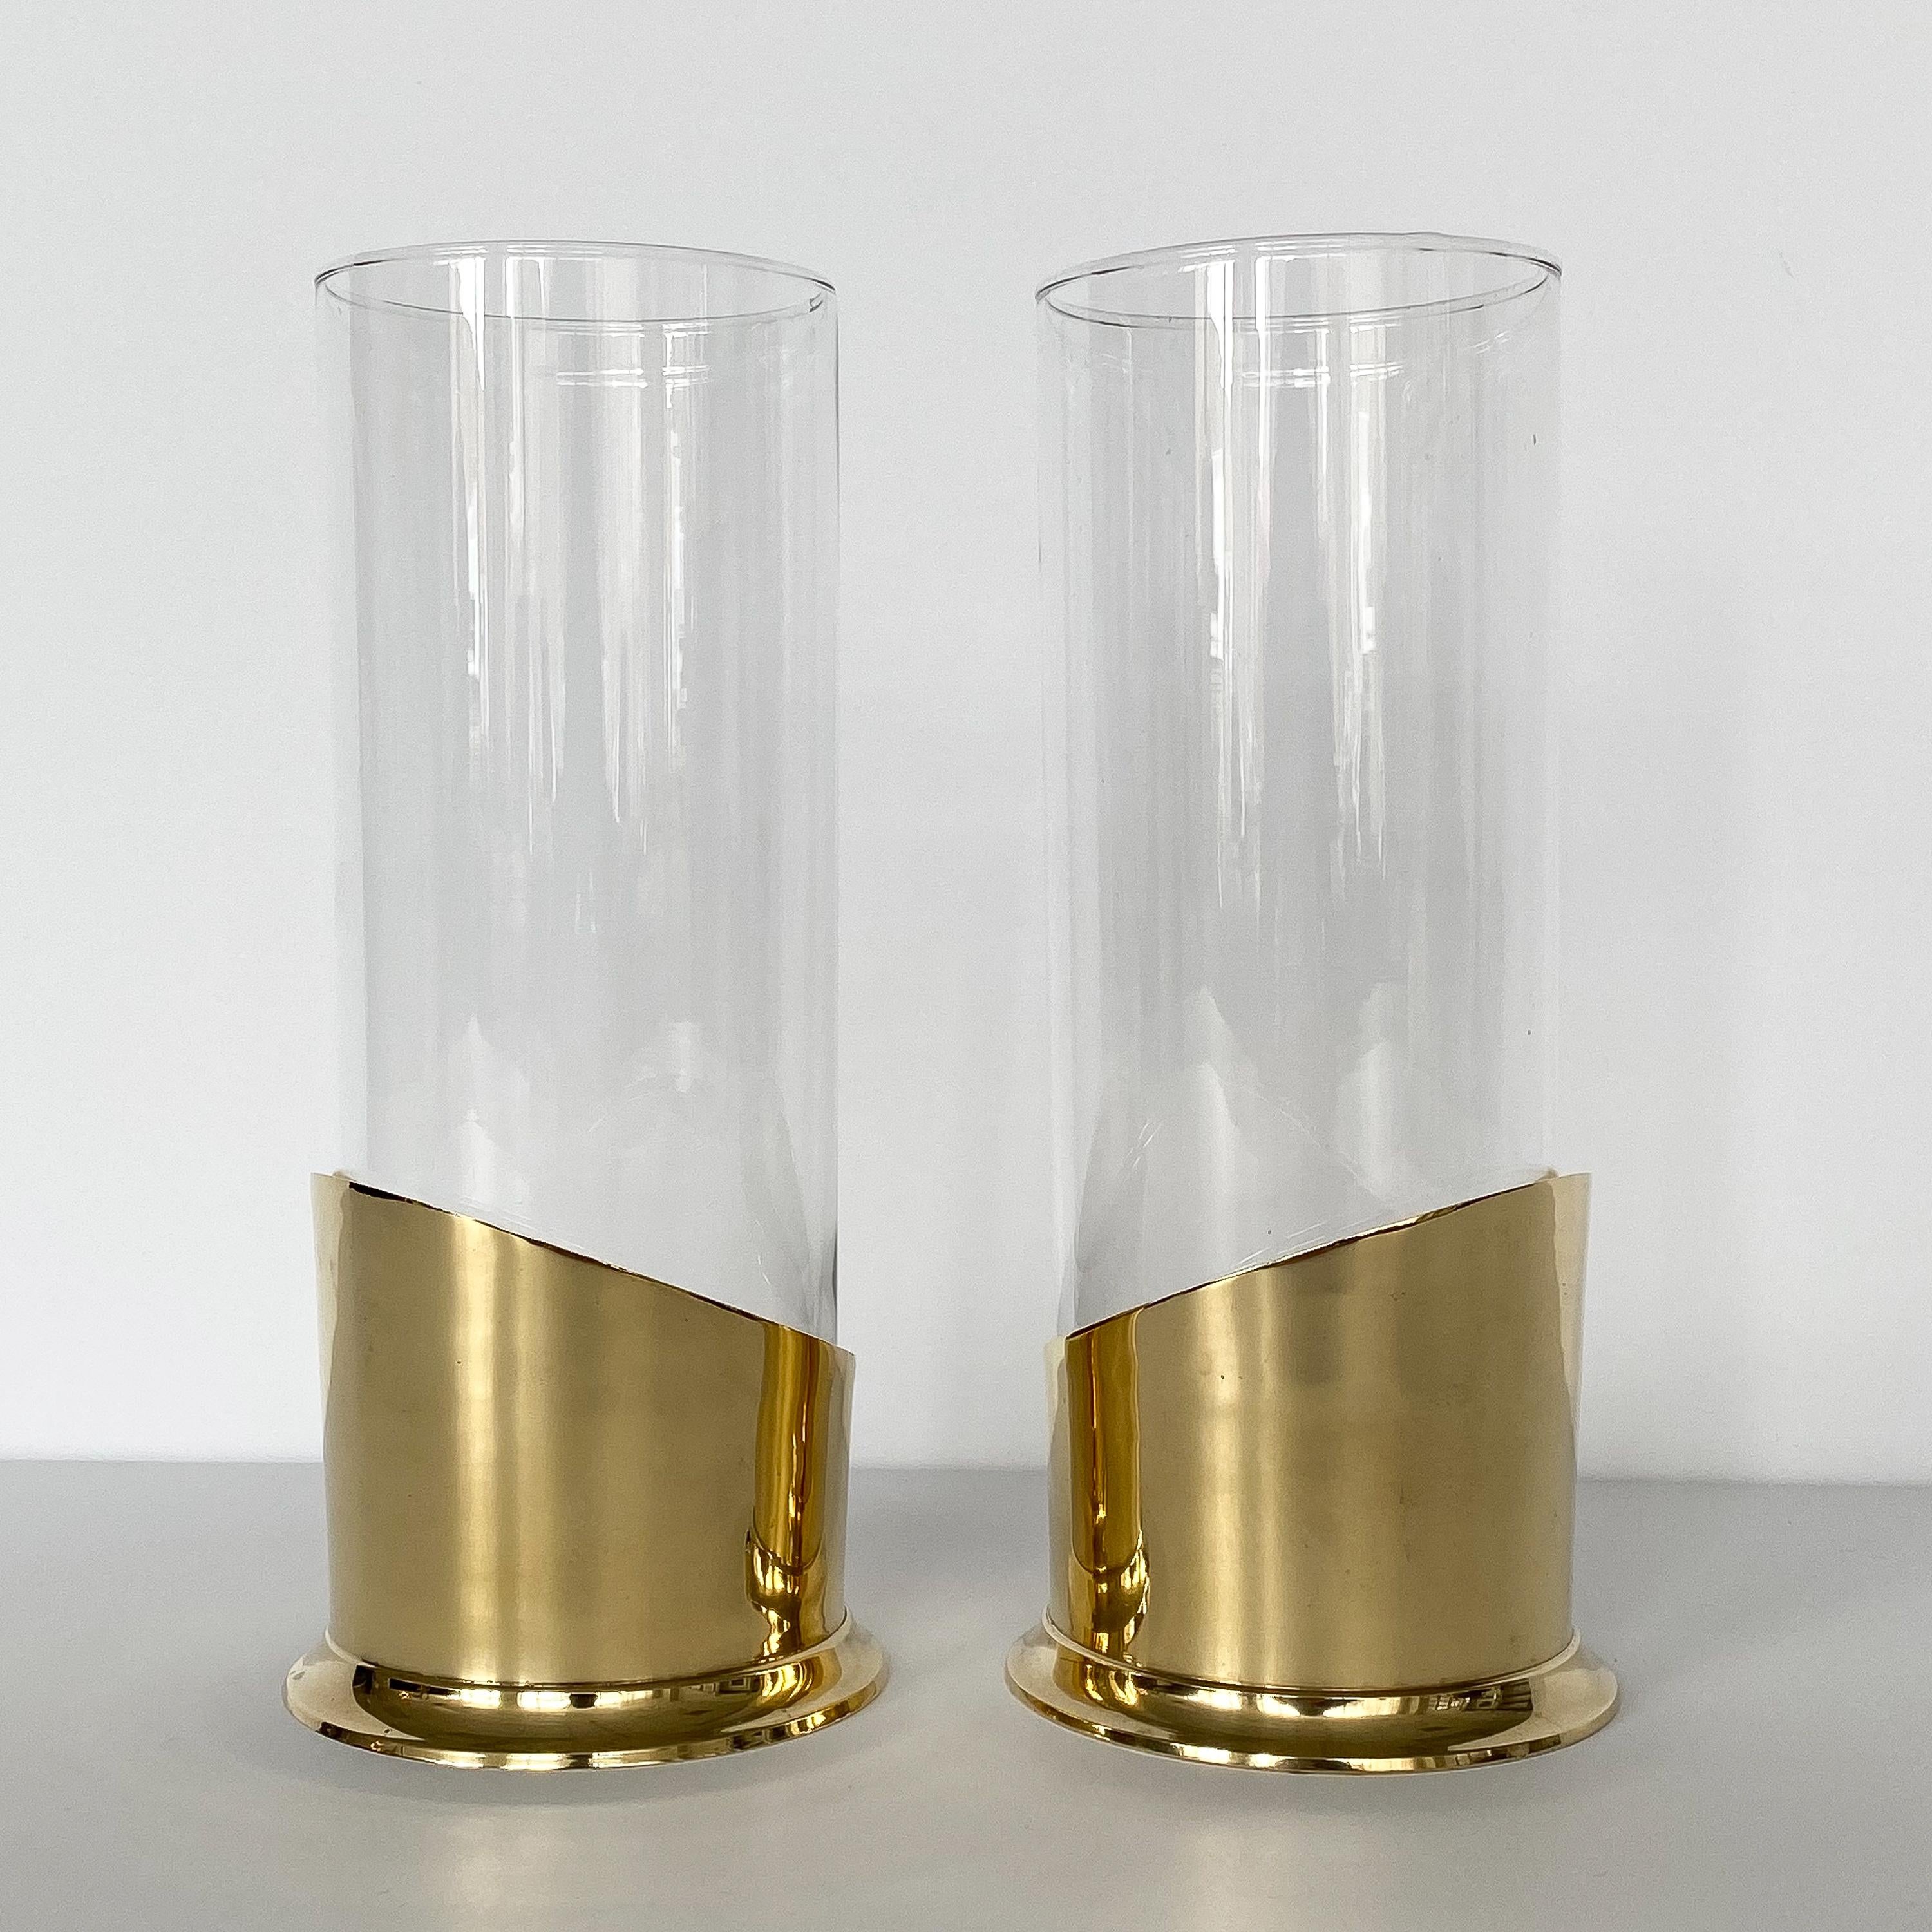 Late 20th Century Pair of Brass and Glass Hurricane Candleholders / Vases